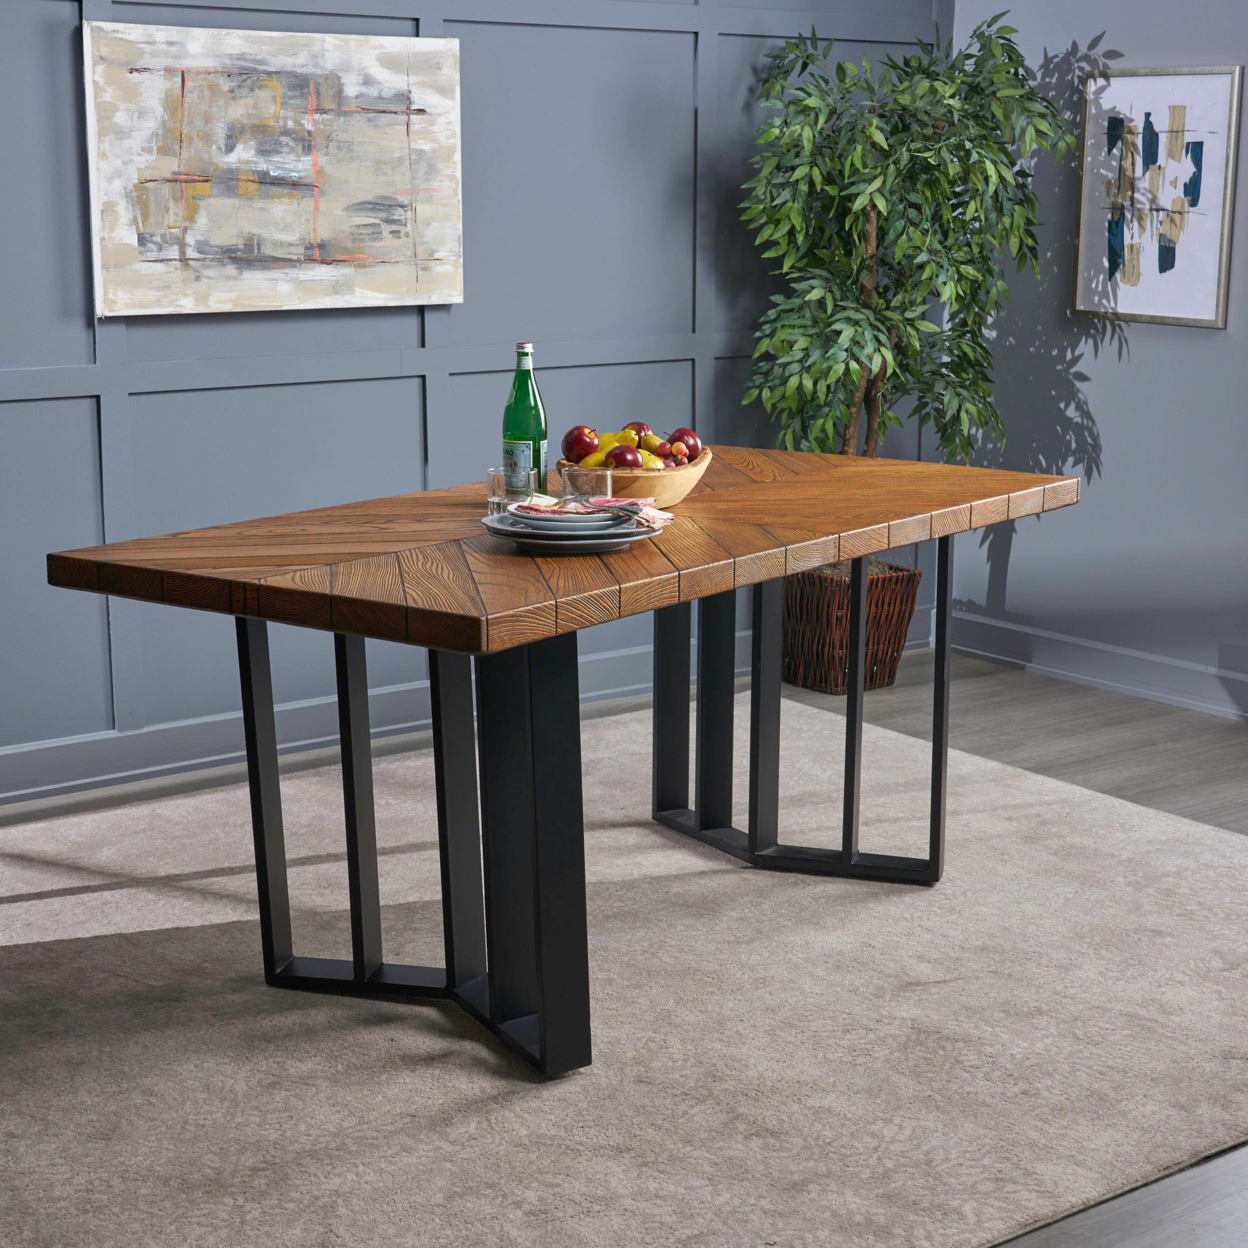 Santa Rosa Indoor Farmhouse Light Weight Concrete Dining Table - Textured Brown